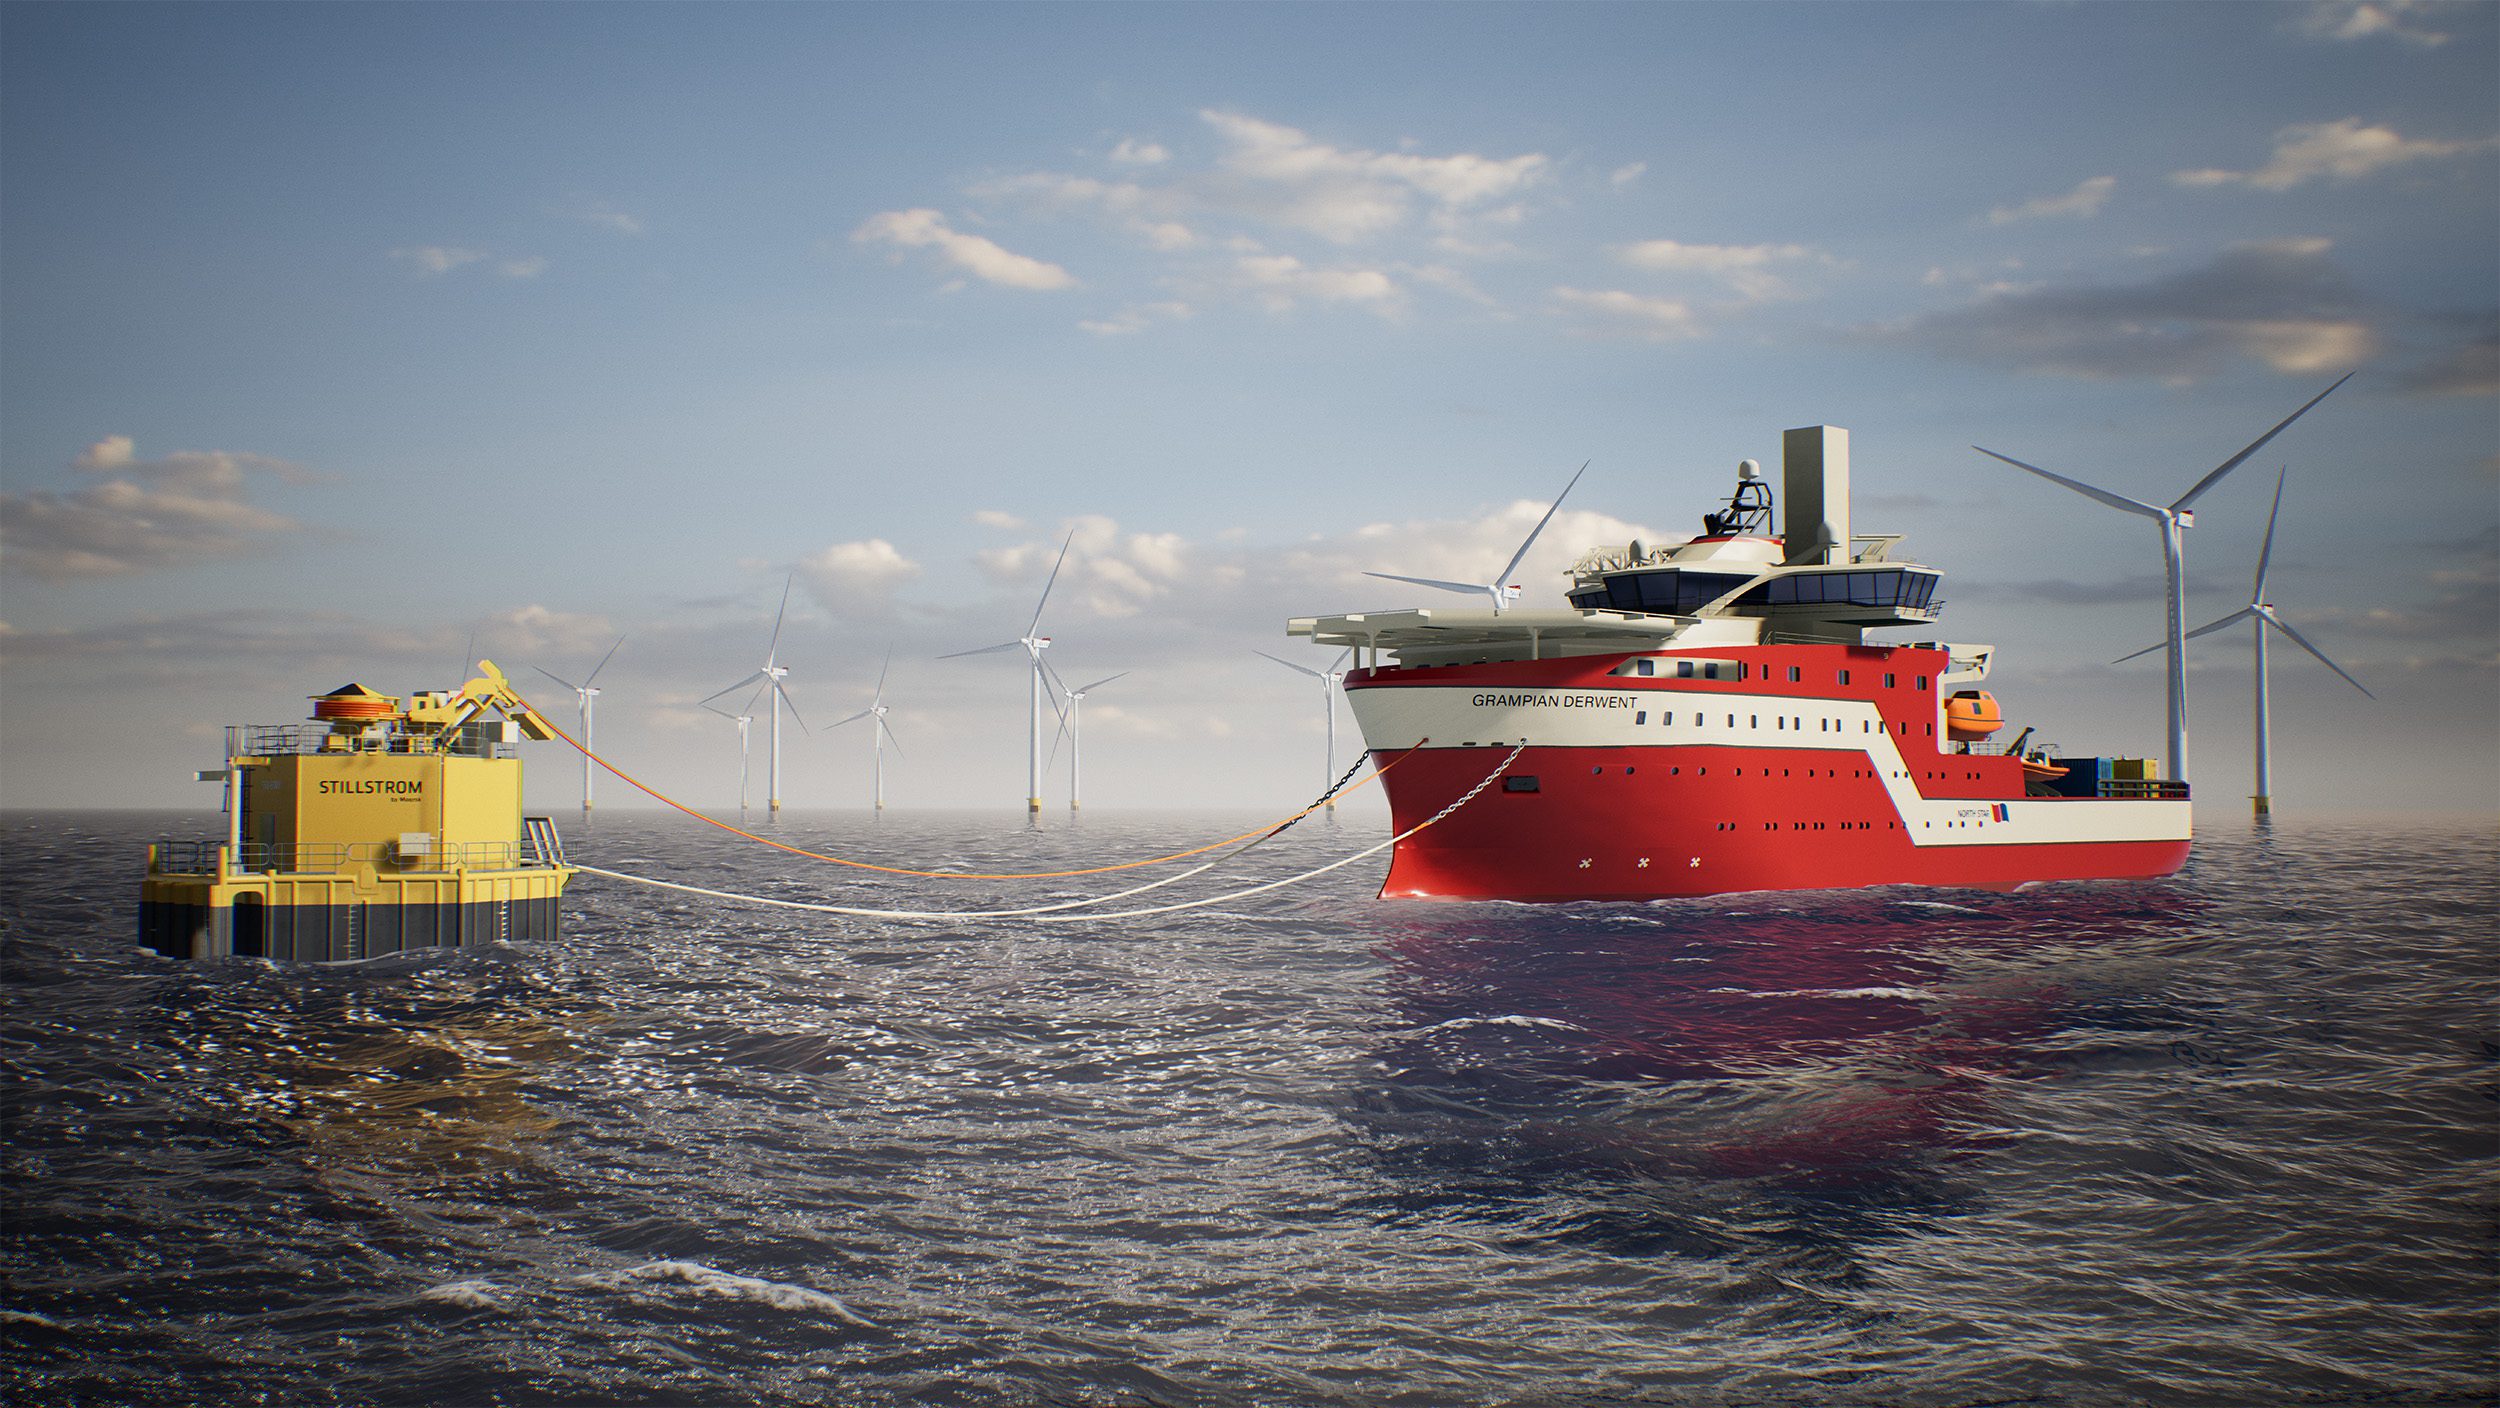 Maersk spin-out Stillstrom and North Star to Accelerate Offshore Charging